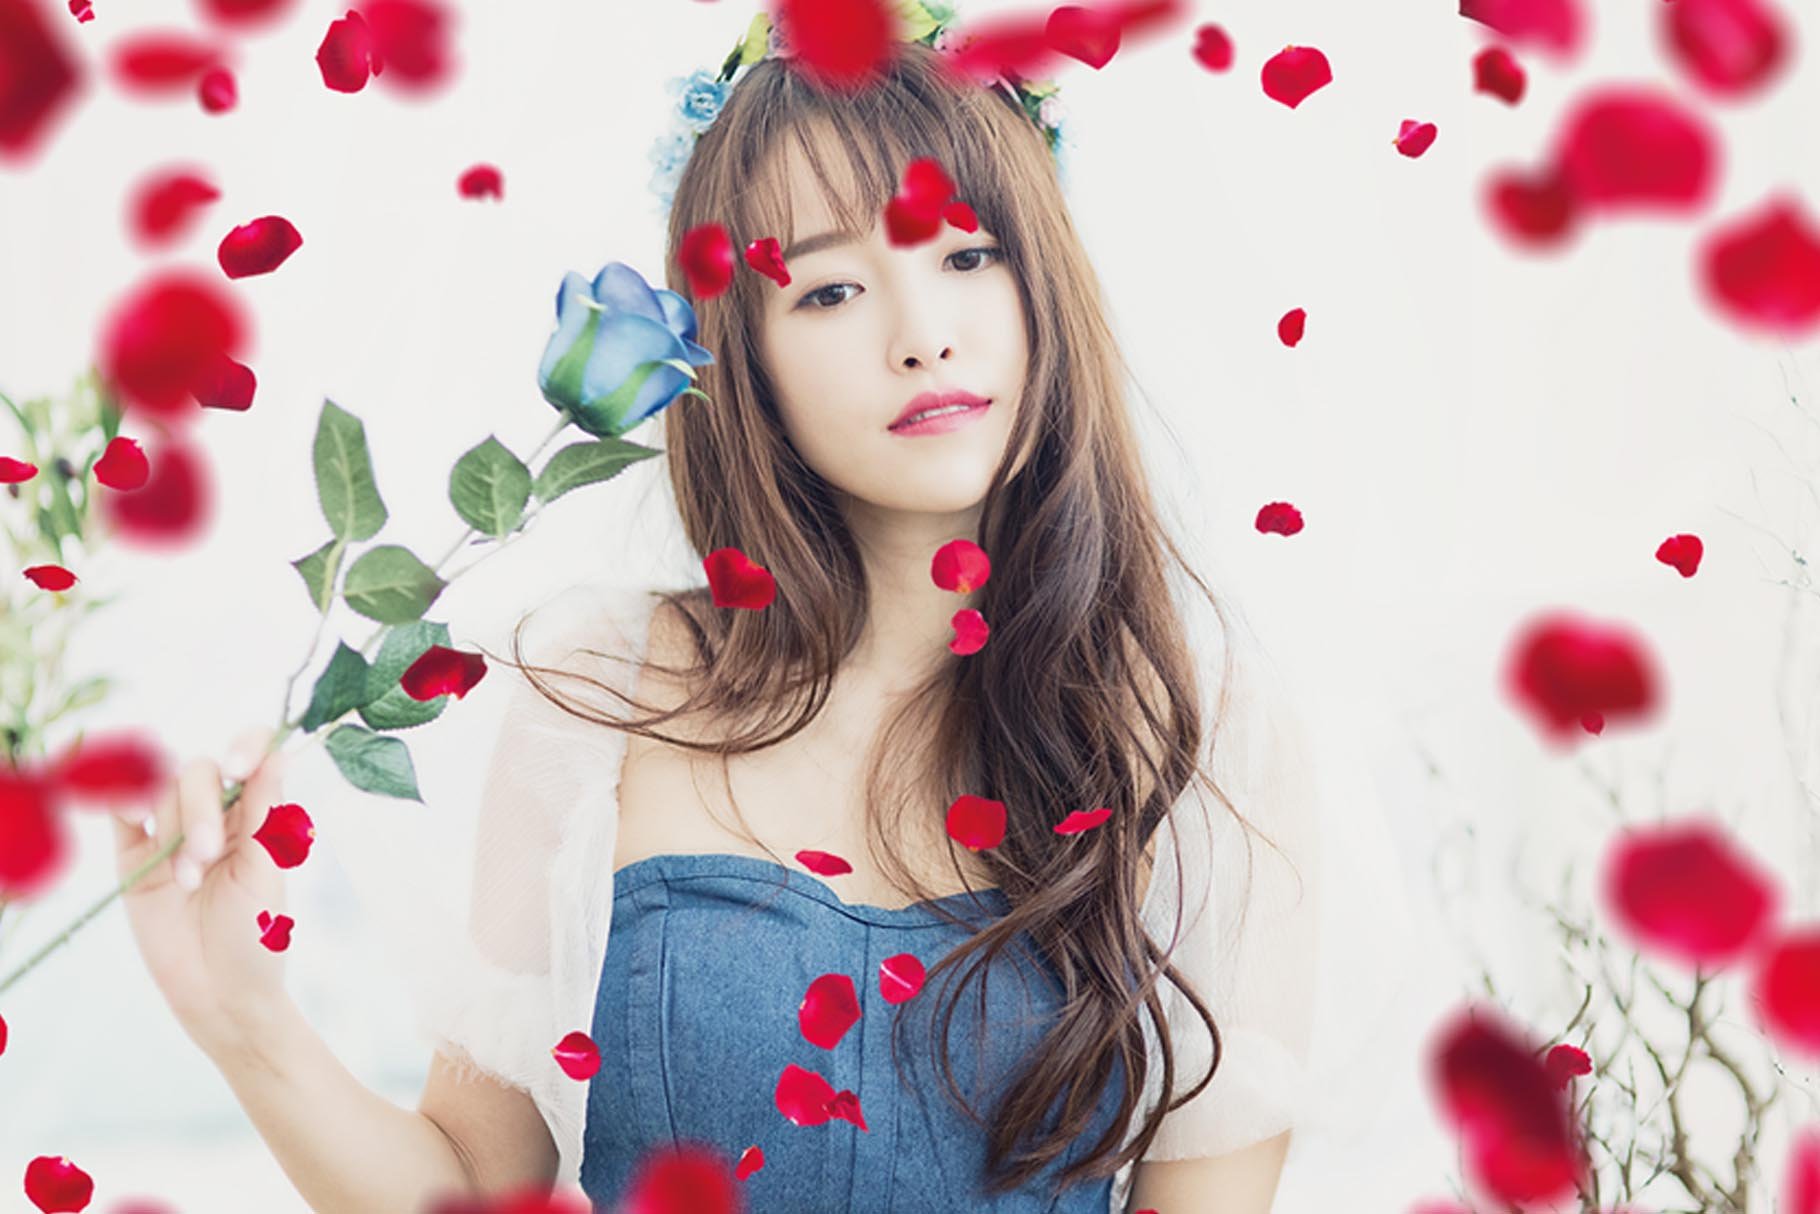 31 Rose Petals Photo Overlaypreview image.